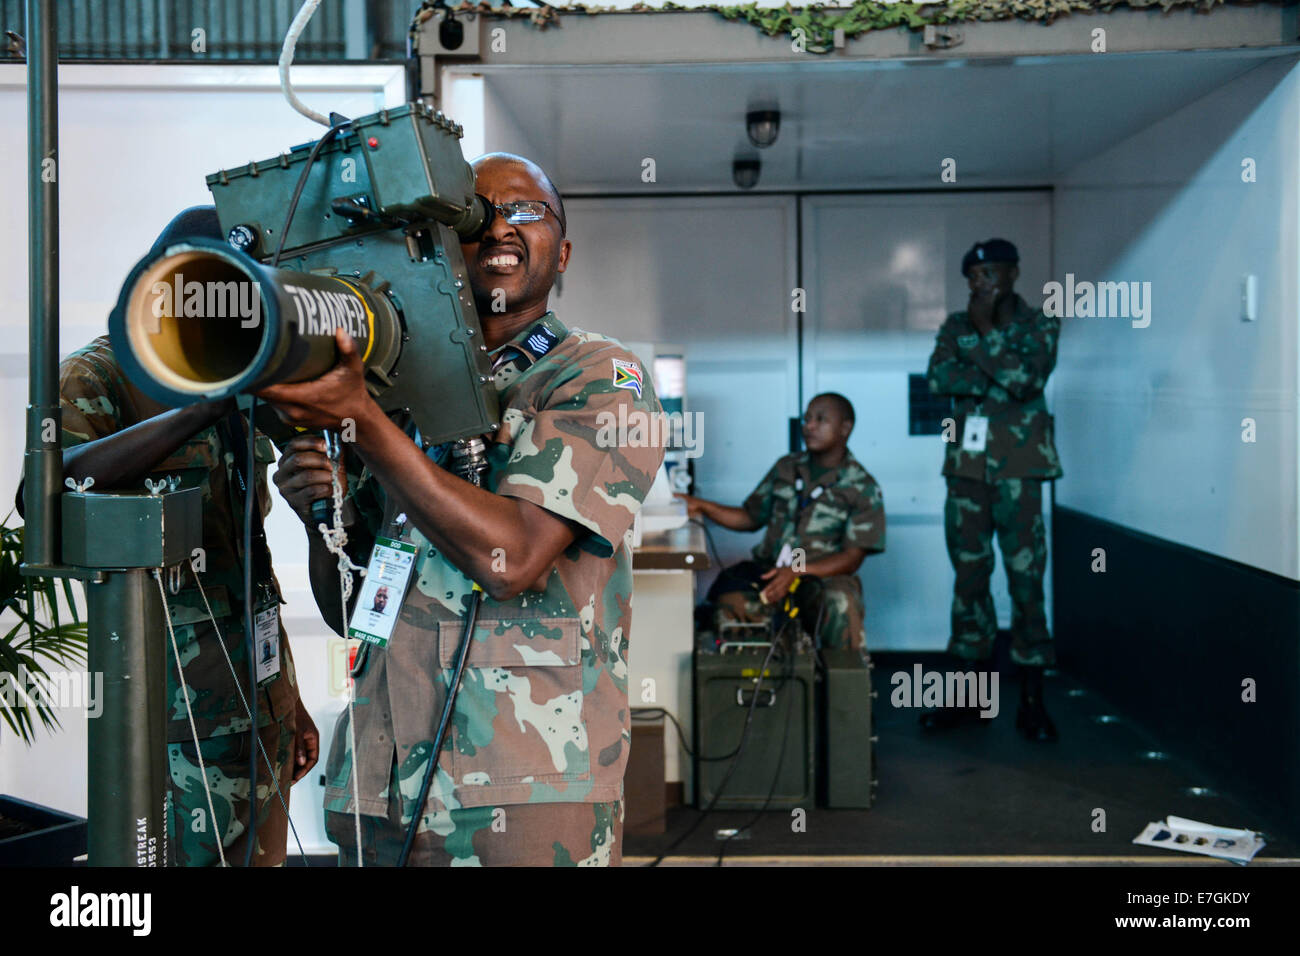 Centurion, Pretoria, South Africa. 17th Sep, 2014. A South African military officer tests an ultra short missile launch system during the first day of Africa Aerospace and Defense 2014 Exhibition in Waterkoof Air Force Basement on the southern outskirts of the administrative capital of Pretoria, on Sept. 17, 2014. The exhibition is the largest one of its kind in Africa. A total of 347 exhibitors from 26 countries and regions took part in the biennial exhibition which will last till Sept. 21. Credit:  Zhai Jianlan/Xinhua/Alamy Live News Stock Photo